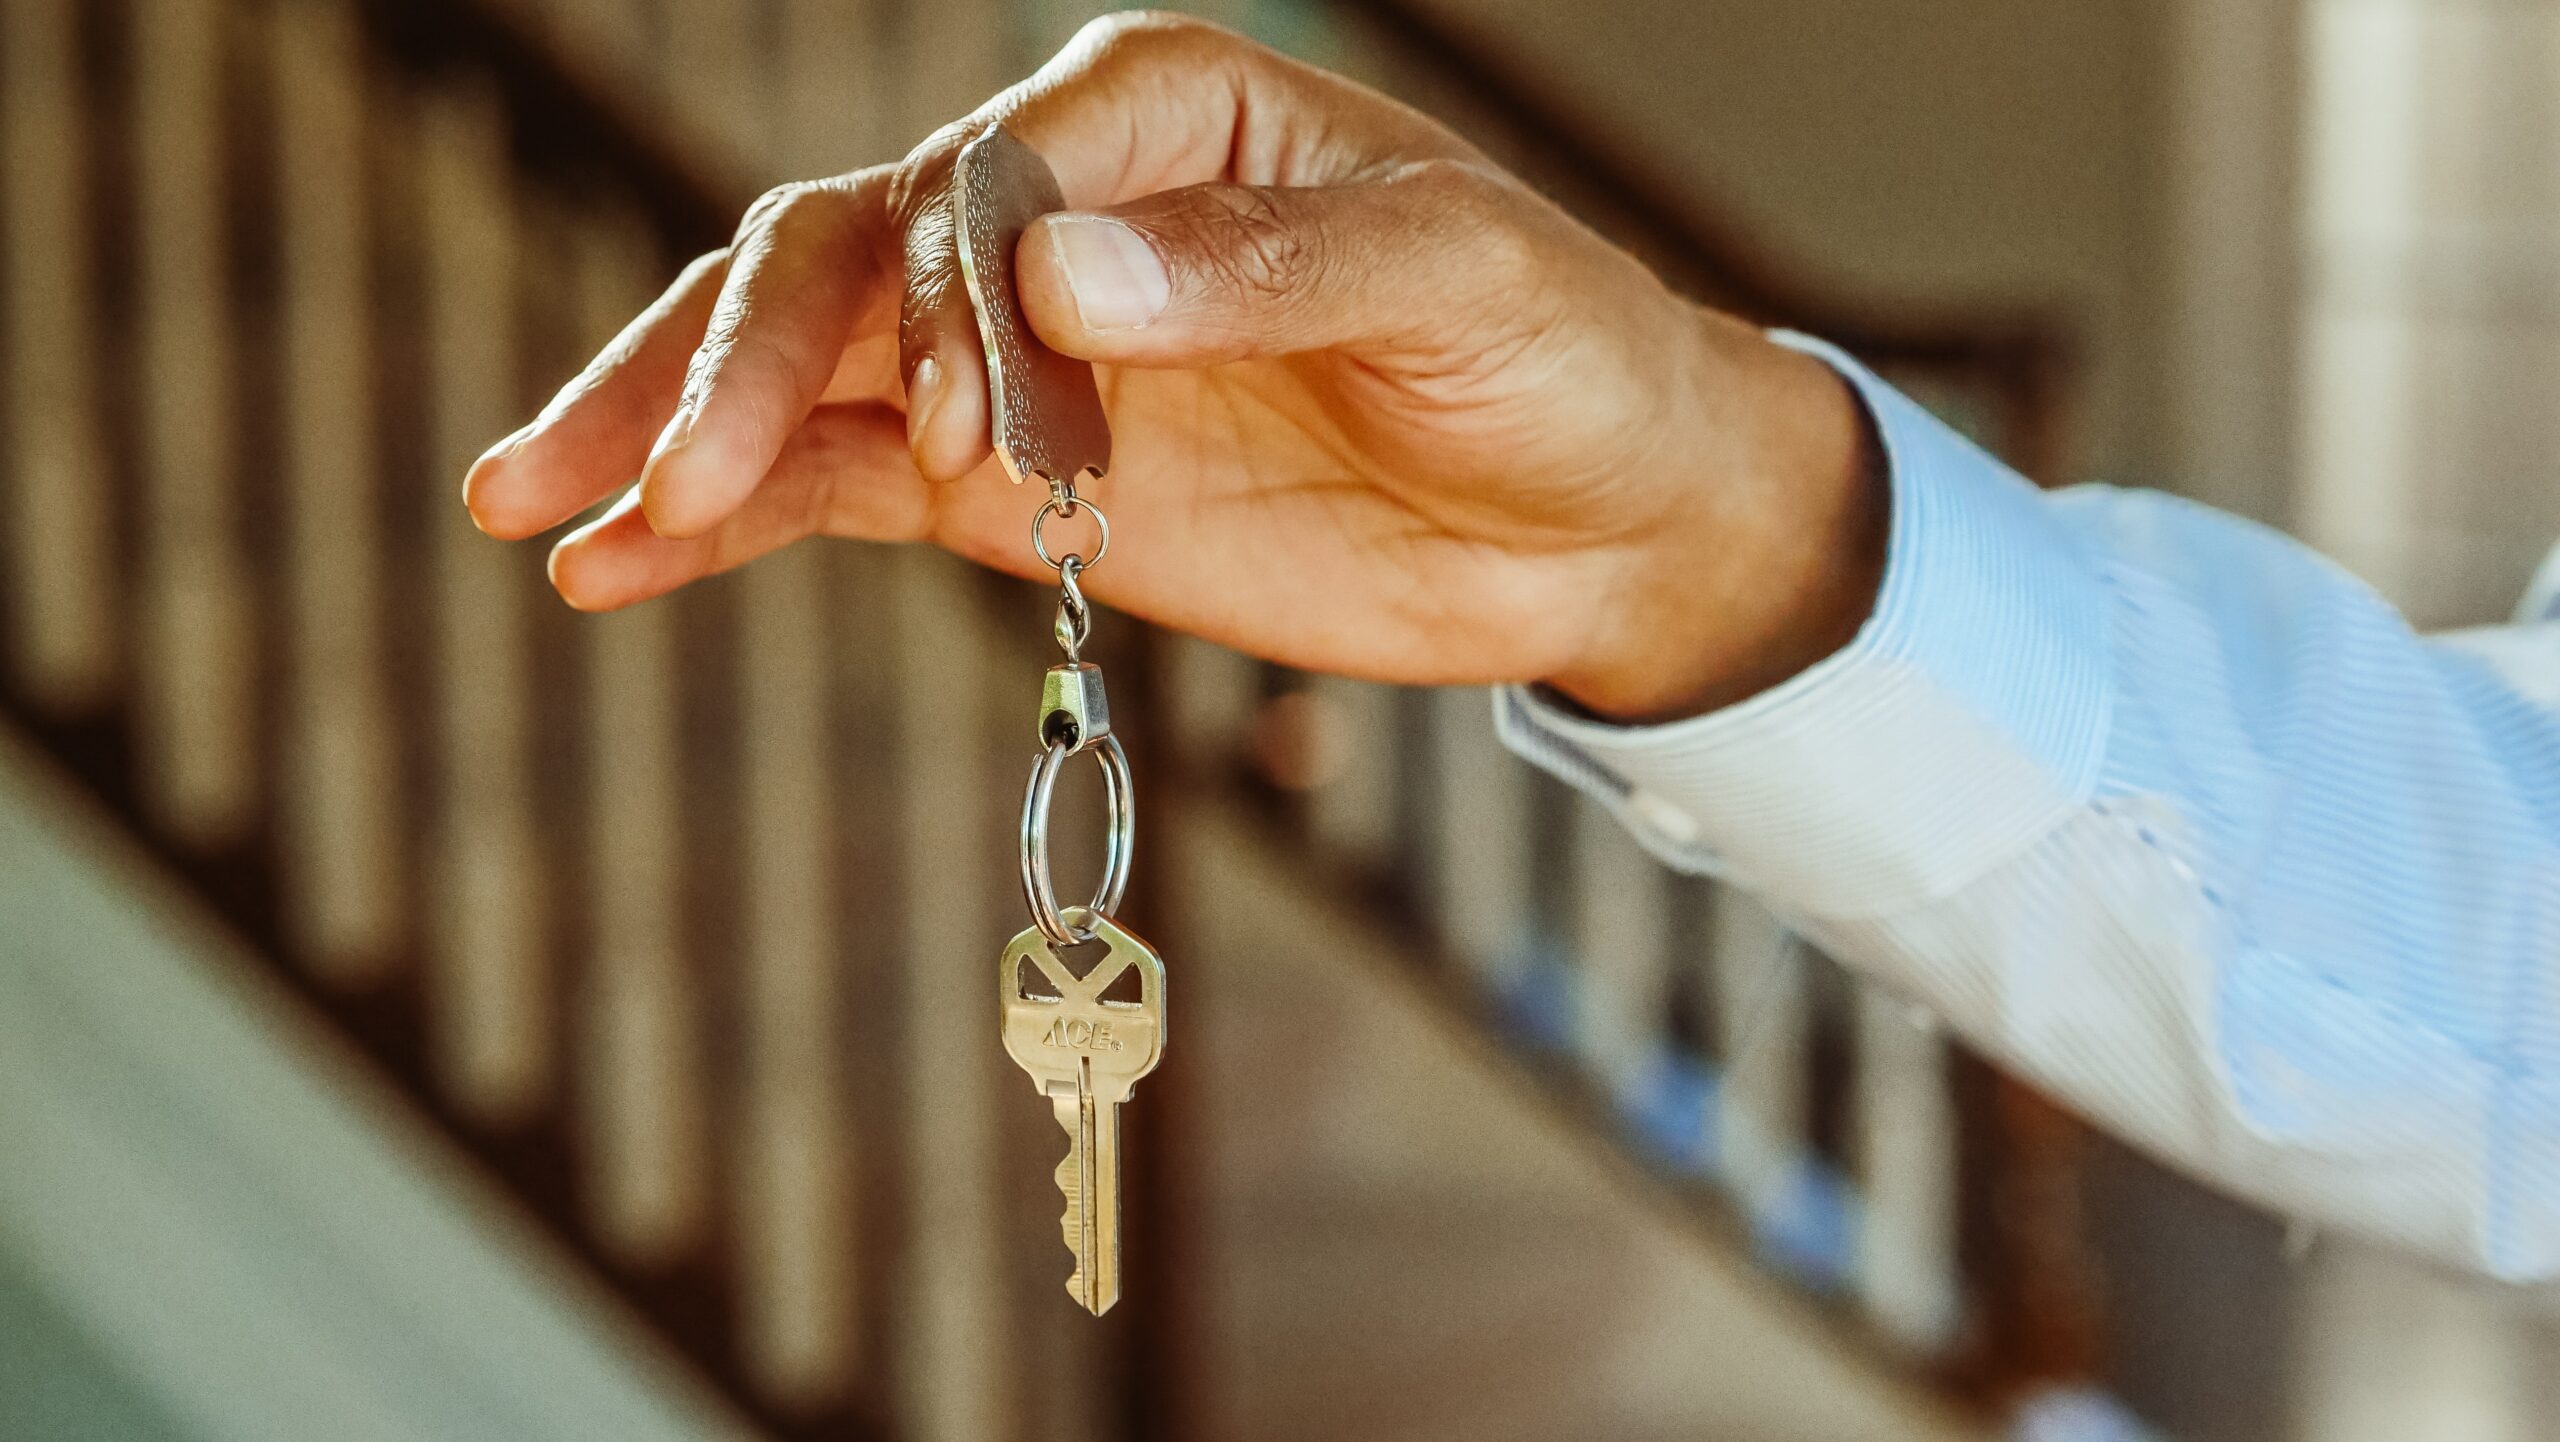 What to Expect in Your First Year of Owning a Home